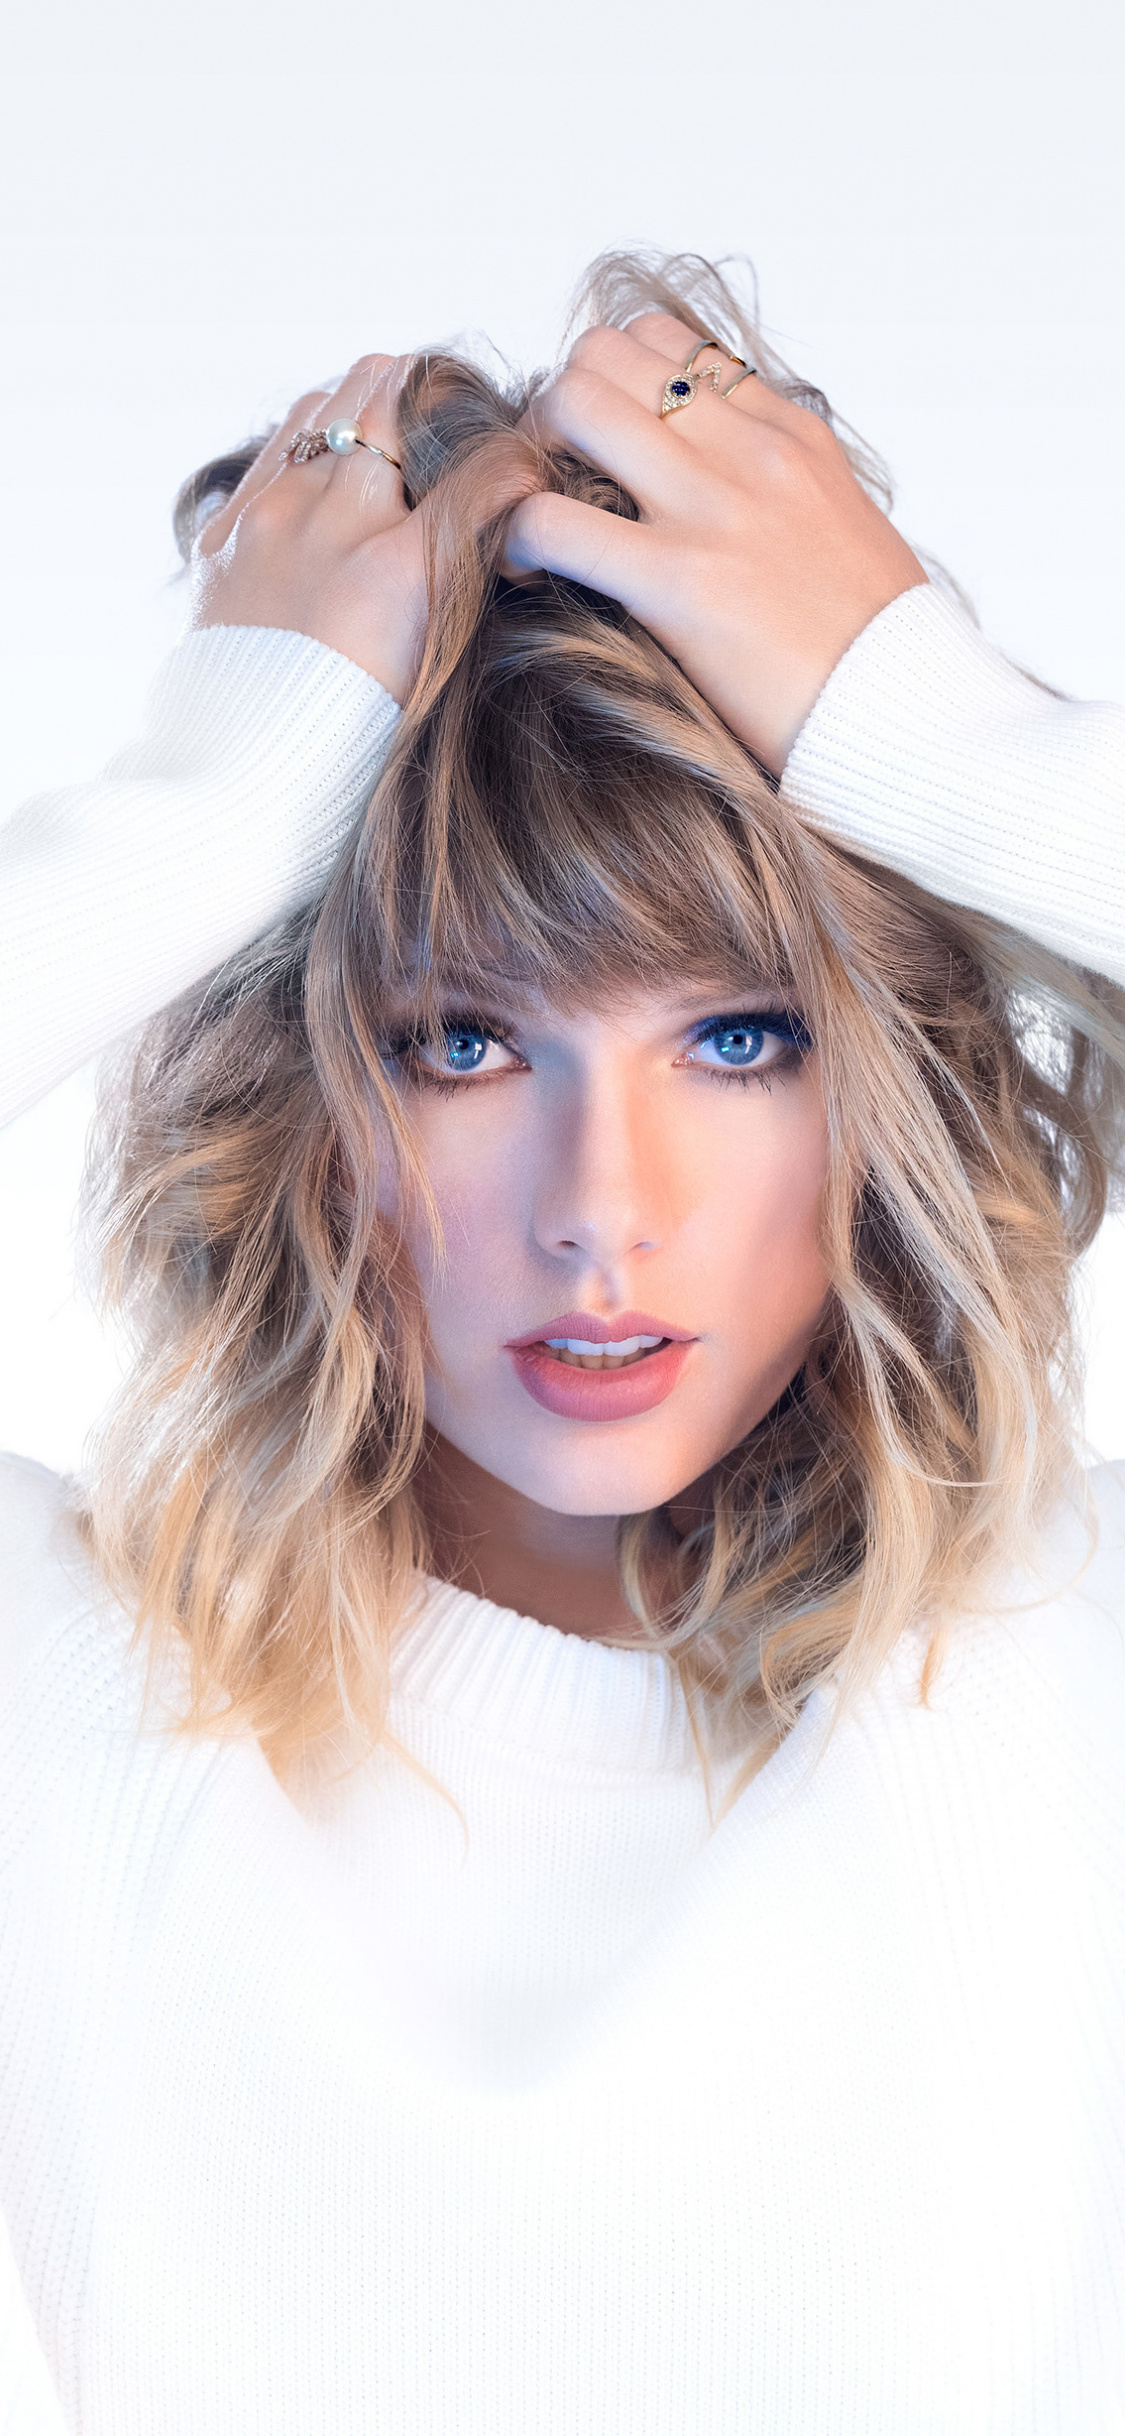 Taylor swift, beautiful, blue eyes, 2019 wallpaper, 1382x HD image, picture, d3760a67